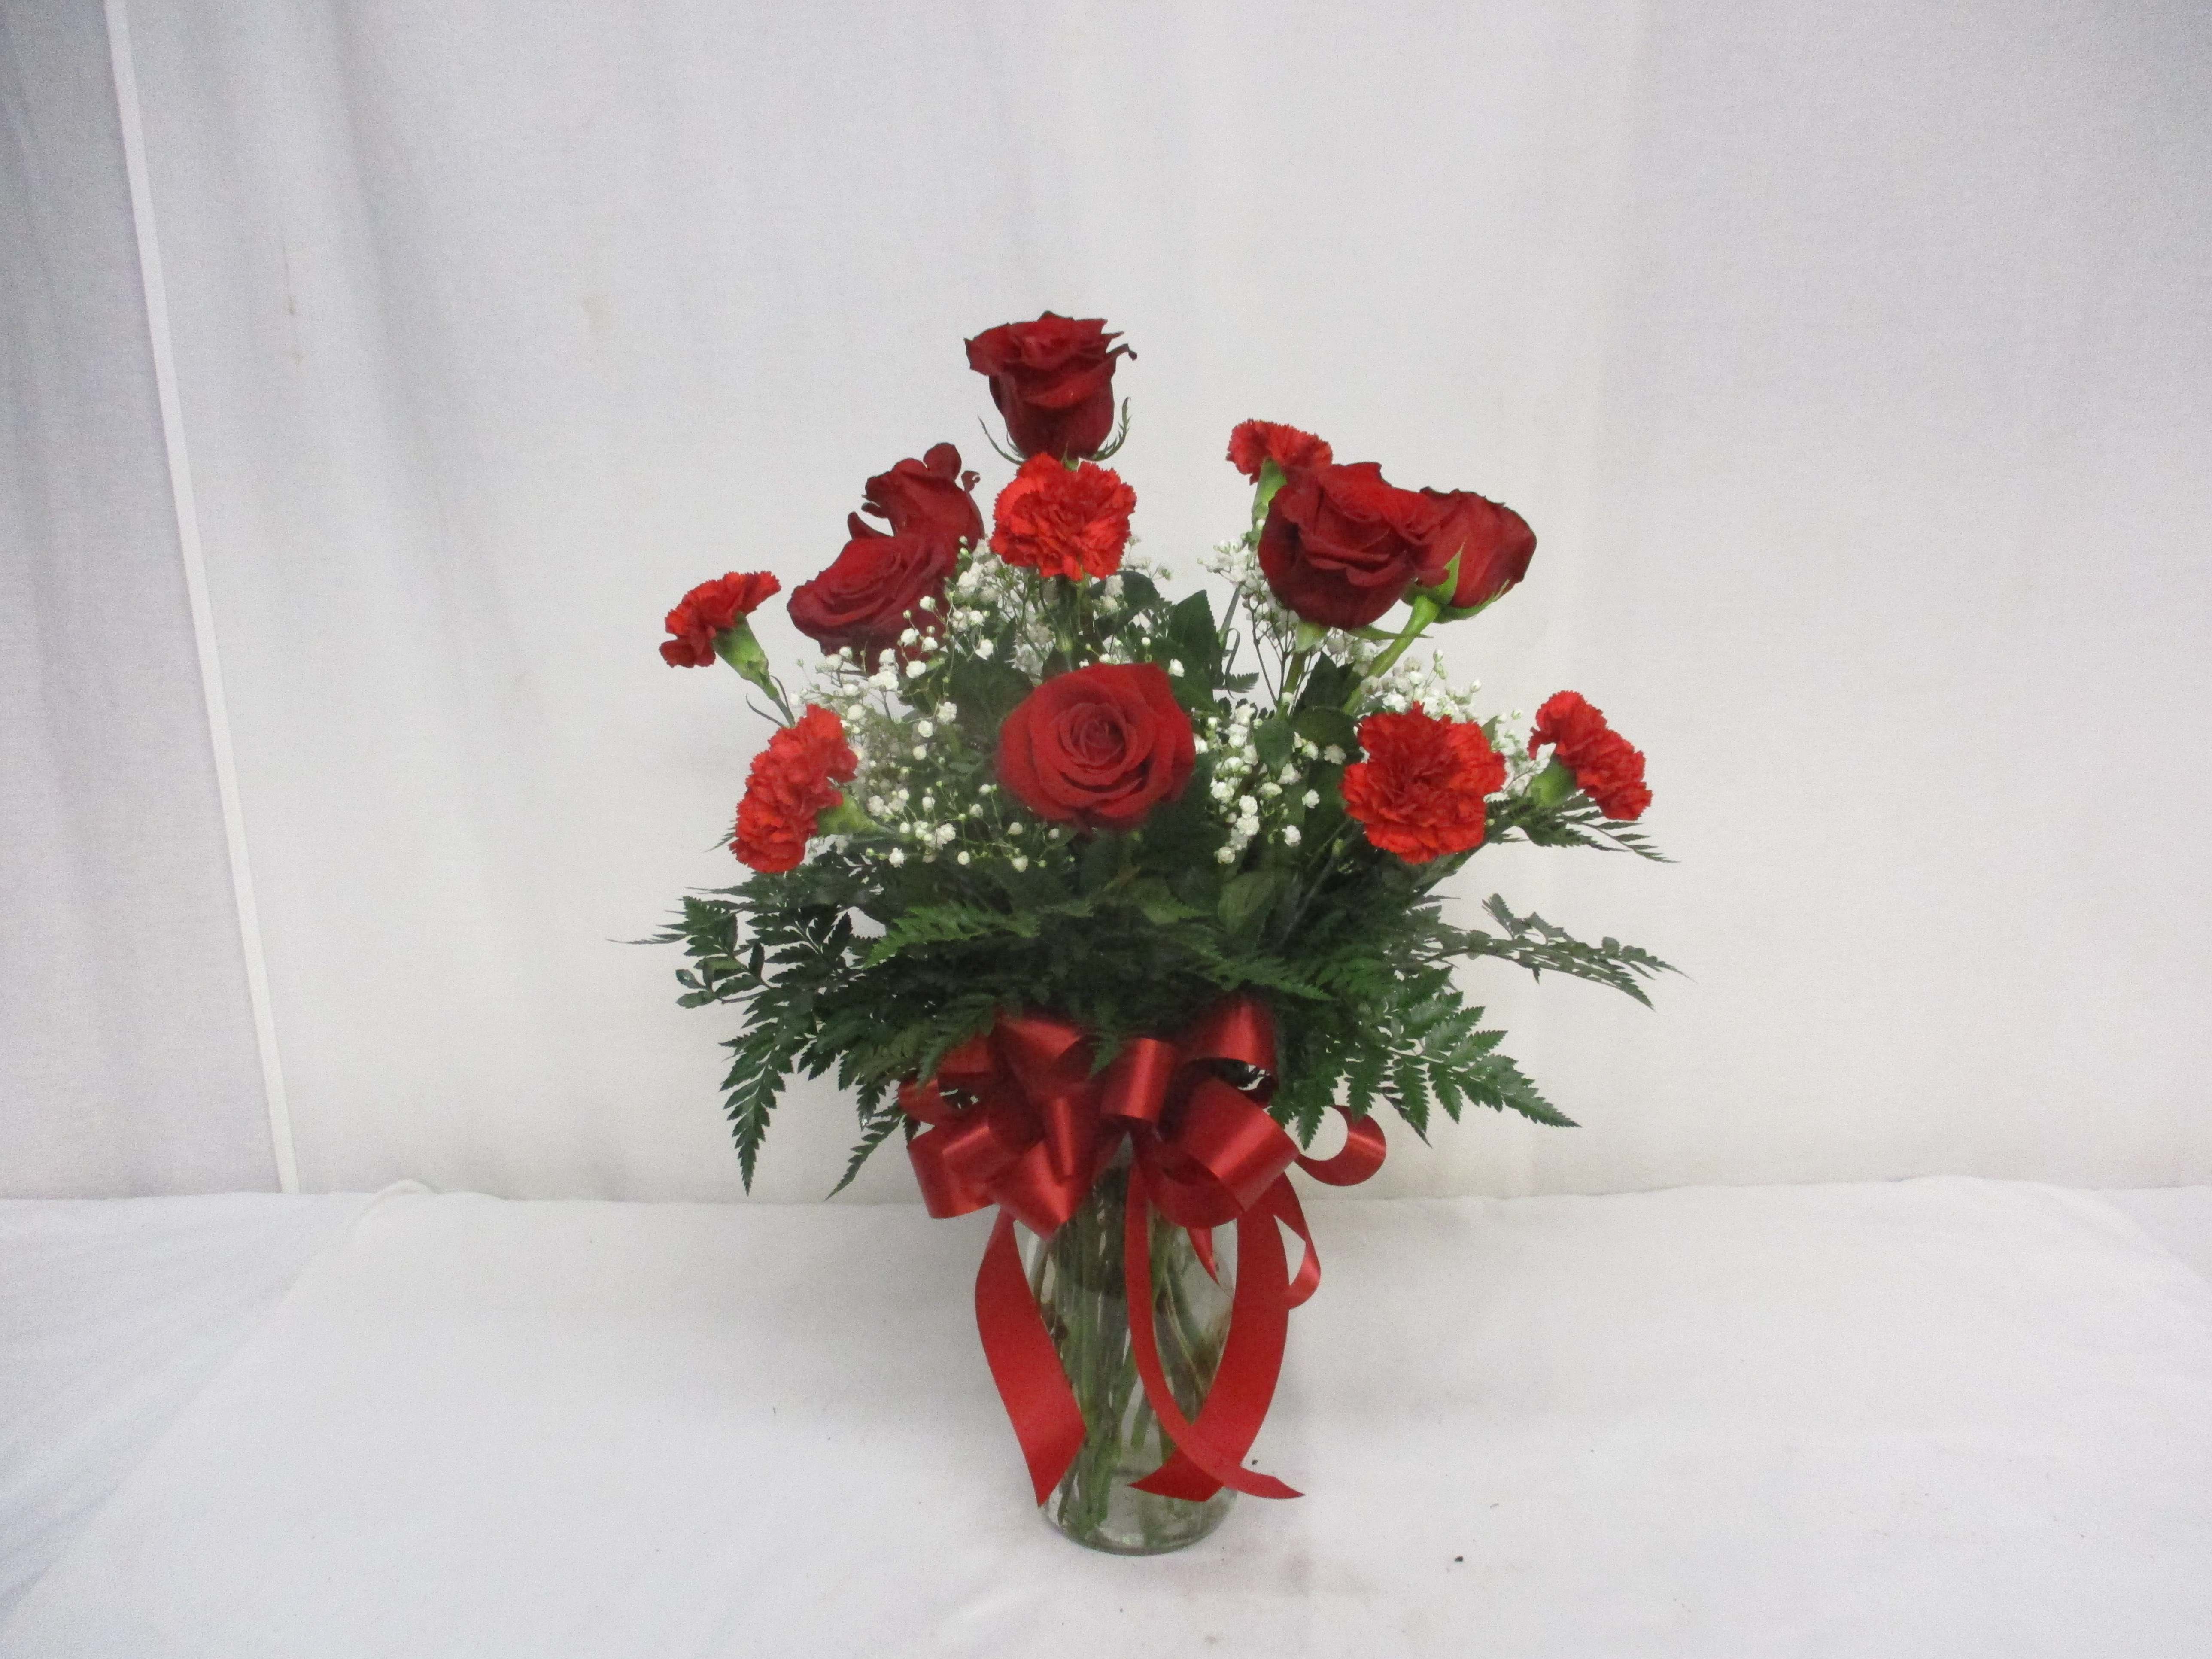 Lots O' Love - This beautiful display contains and even dozen of red blooms, half roses and half carnations, topped off with a heart of Love.